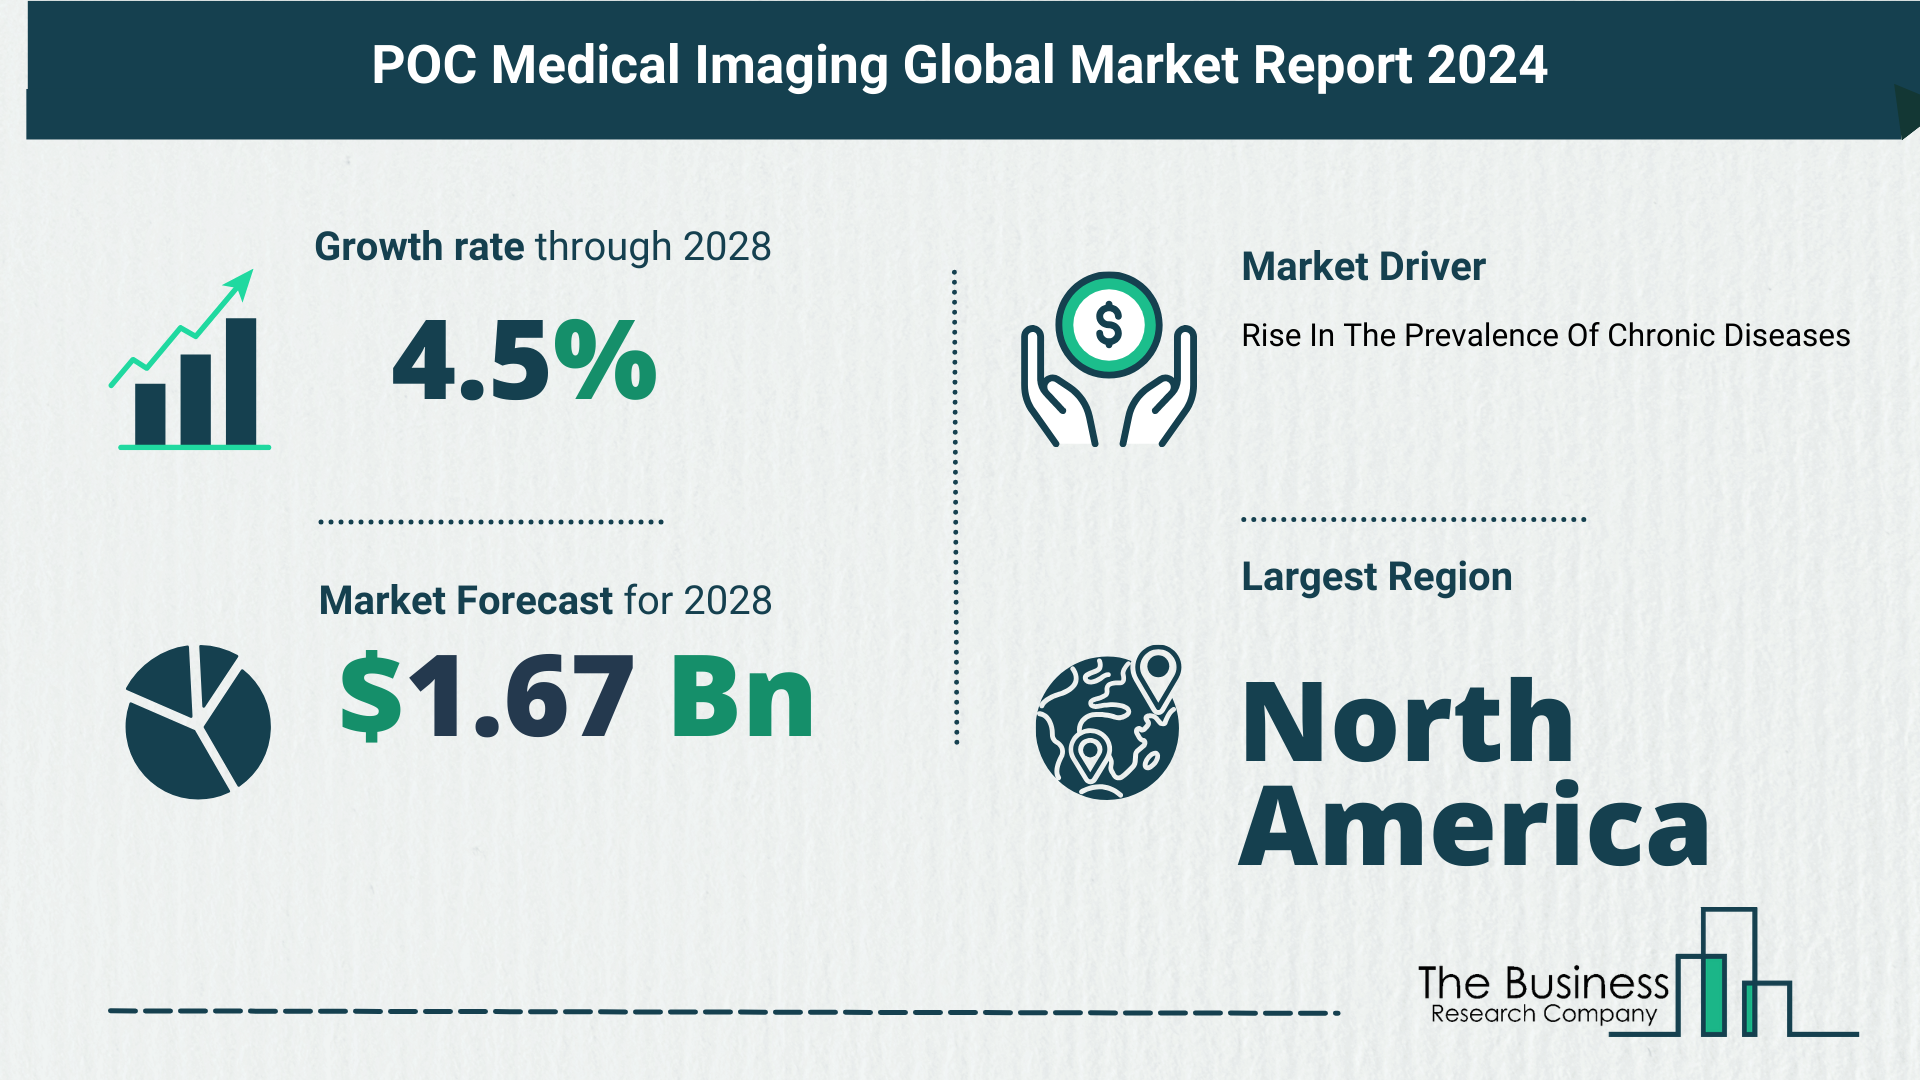 5 Takeaways From The POC Medical Imaging Market Overview 2024